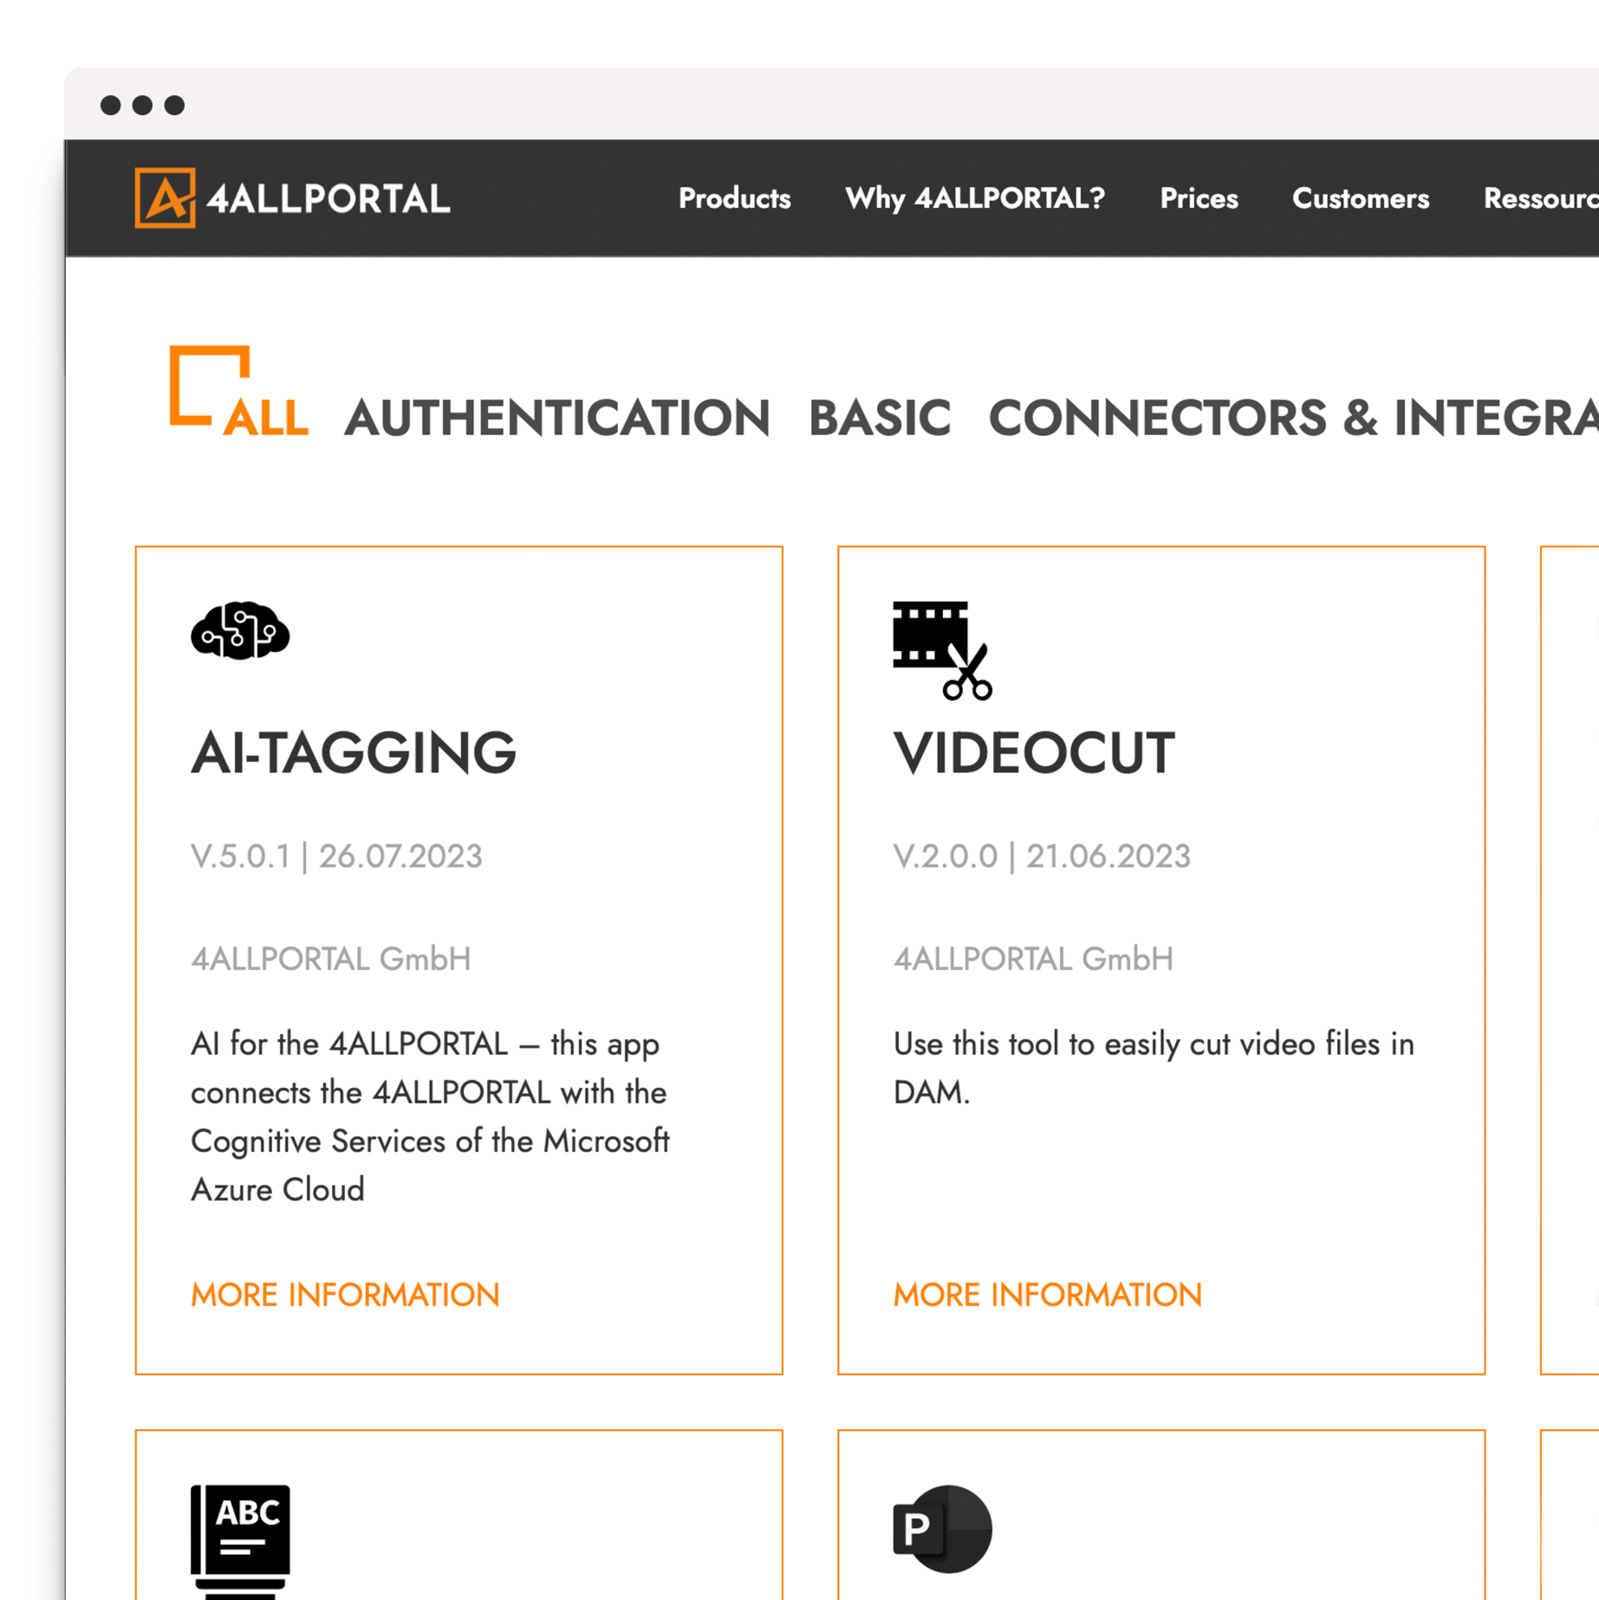 Learn more about 4ALLPORTAL Apps